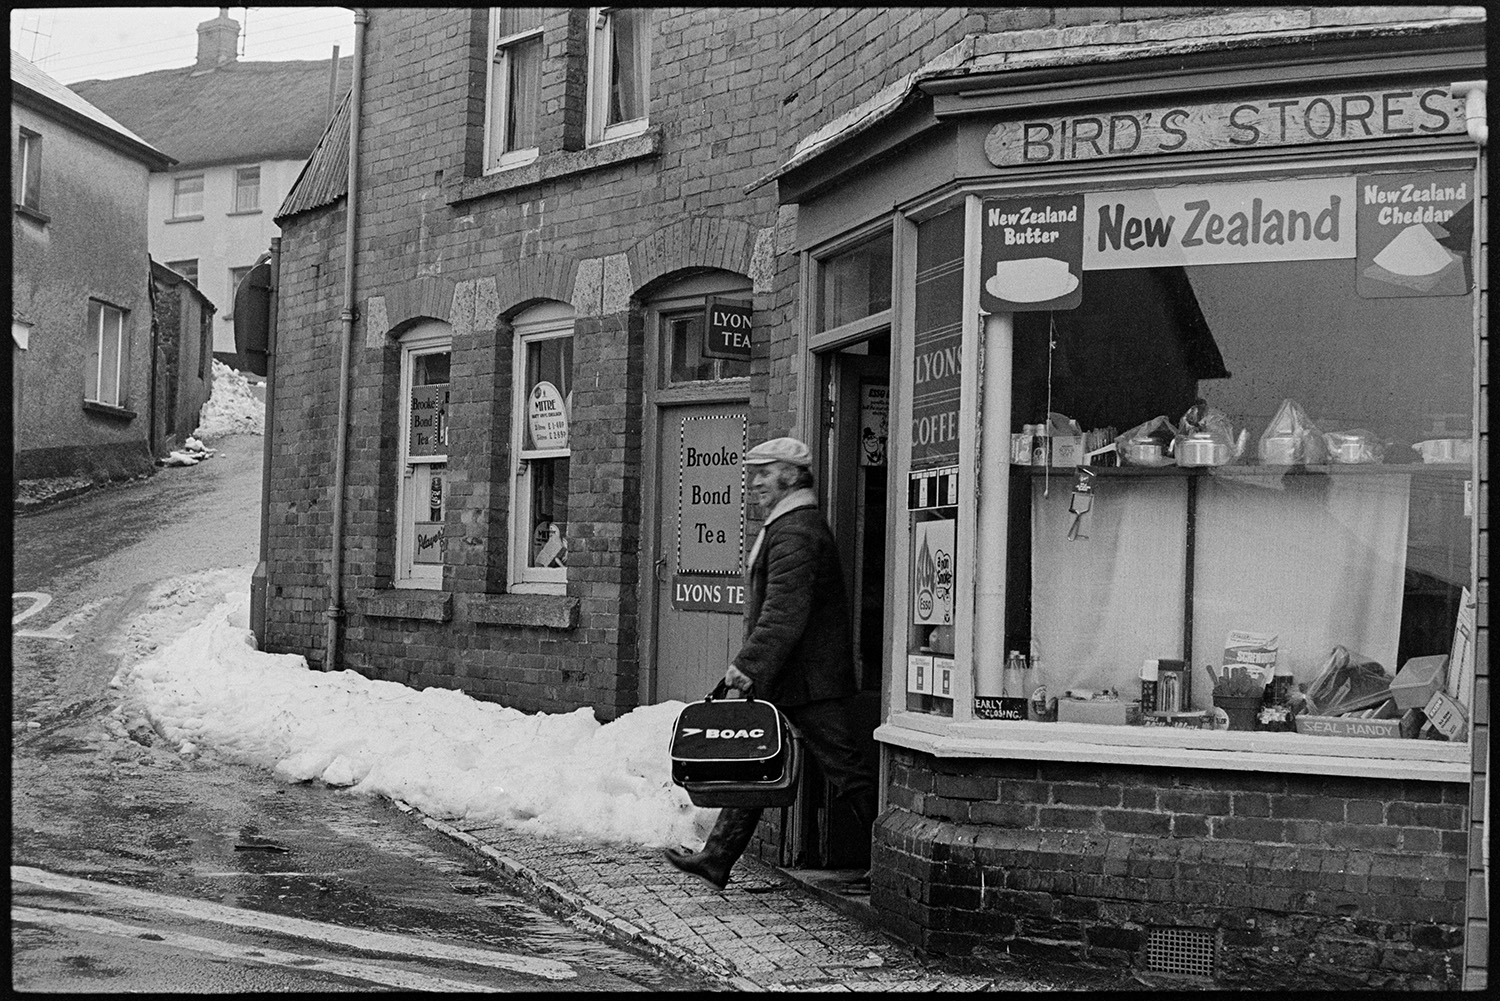 Snow street scenes with shops and shoppers.
[Man with shopping bags stepping into a snow lined street outside Bird's Stores in Winkleigh. Teapots are displayed in the shop window.]